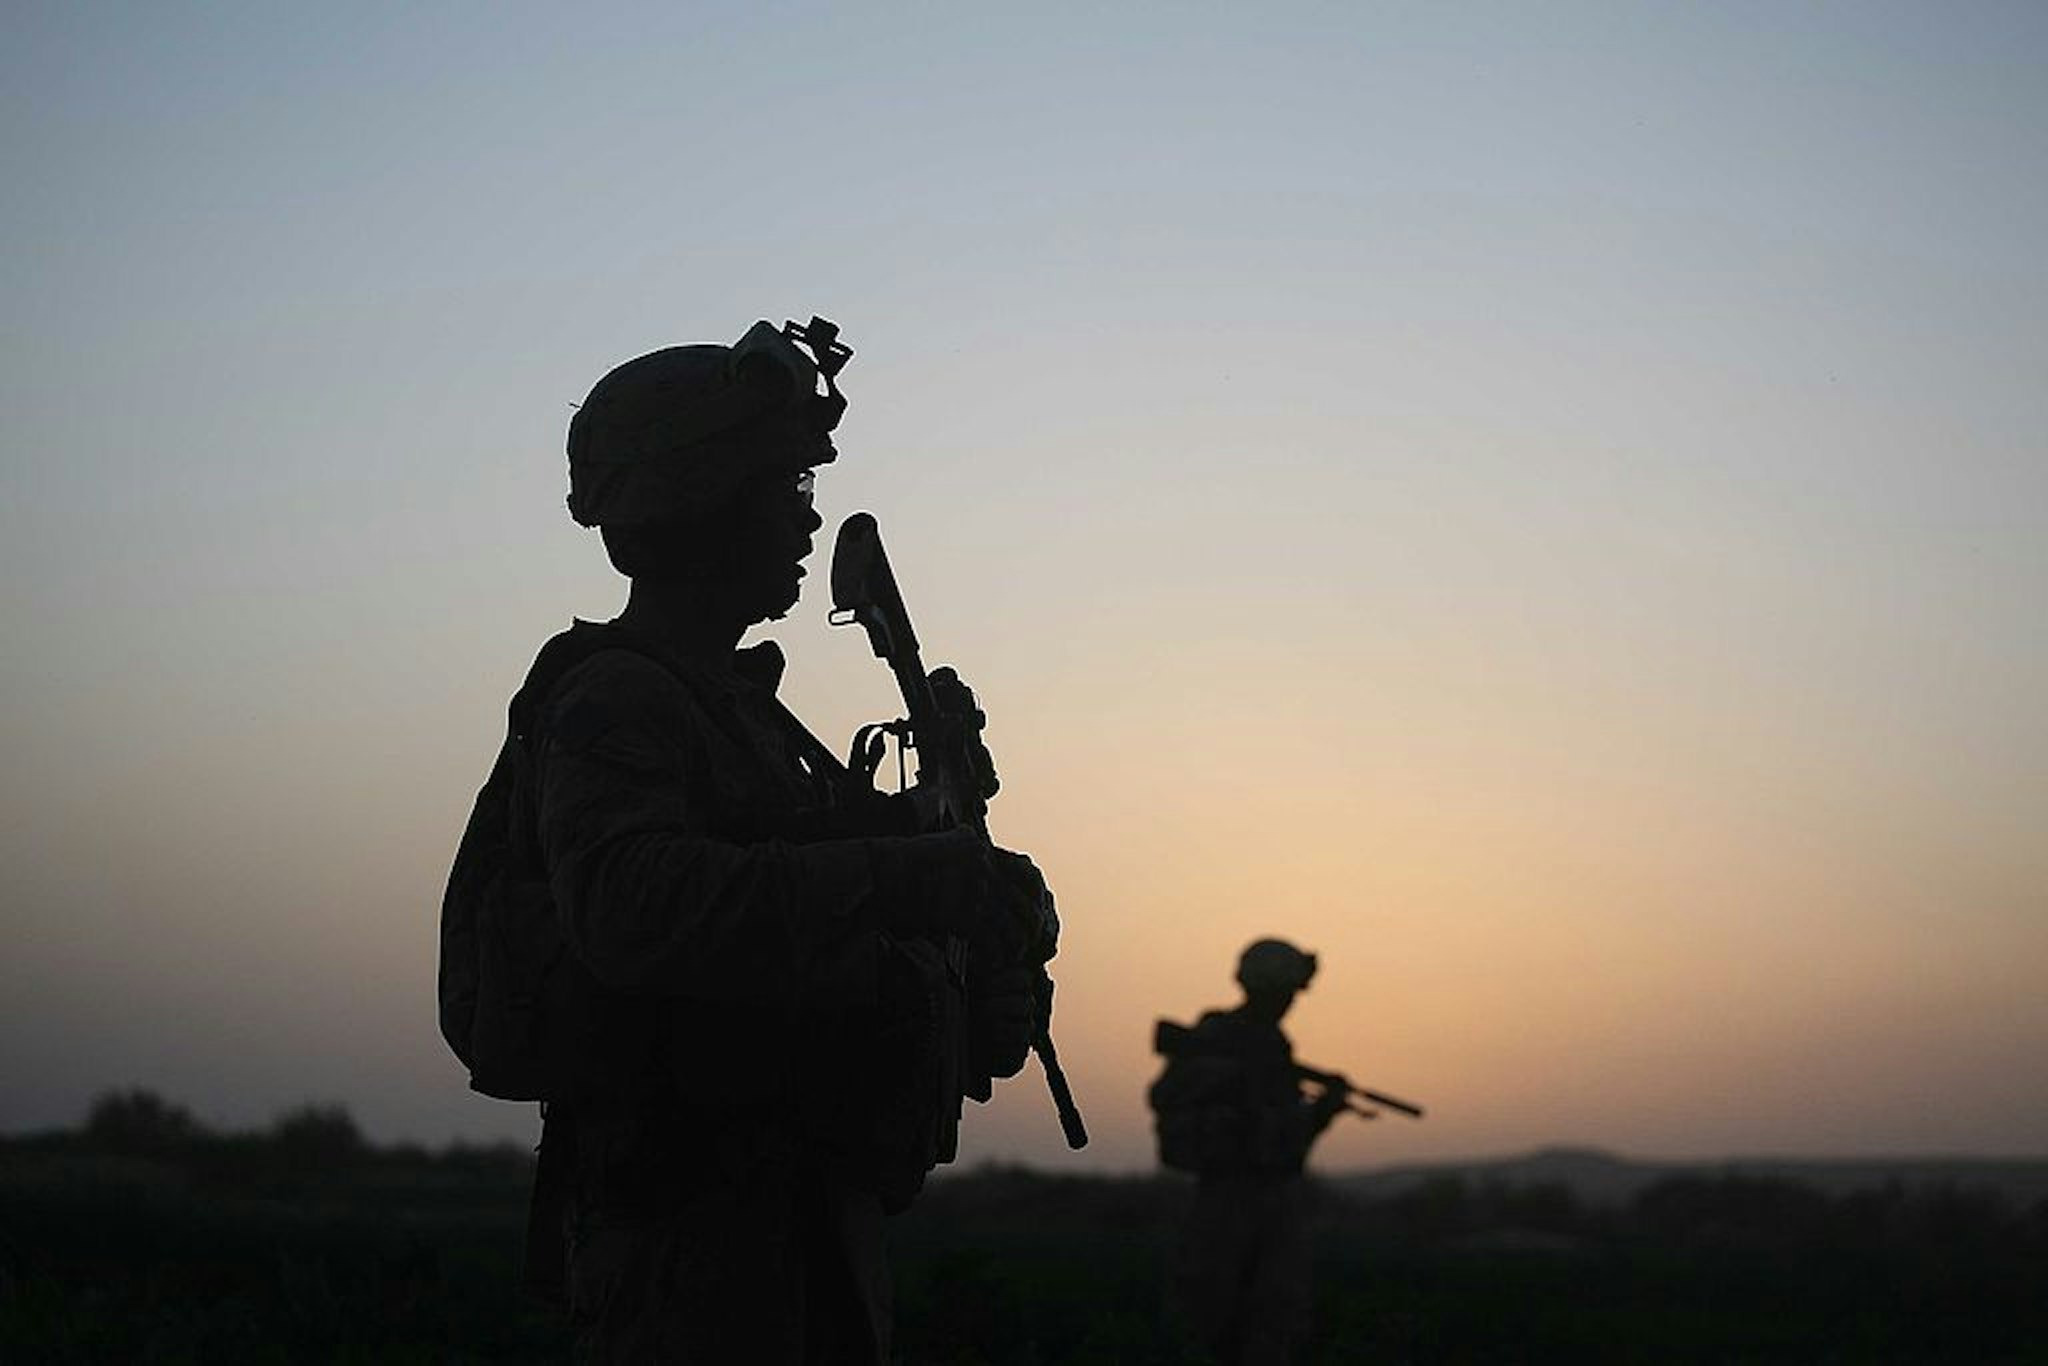 HERATI, AFGHANISTAN- JULY 18: U.S. Marines with the 2nd Marine Expeditionary Brigade, RCT 2nd Battalion 8th Marines Echo Co. step off in the early morning during an operation to push out Taliban fighters on July 18, 2009 in Herati, Afghanistan . The Marines met no resistance during the operatoin. The Marines are part of Operation Khanjari which was launched to take areas in the Southern Helmand Province that Taliban fighters are using as a resupply route and to help the local Afghan population prepare for the upcoming presidential elections. (Photo by Joe Raedle/Getty Images)